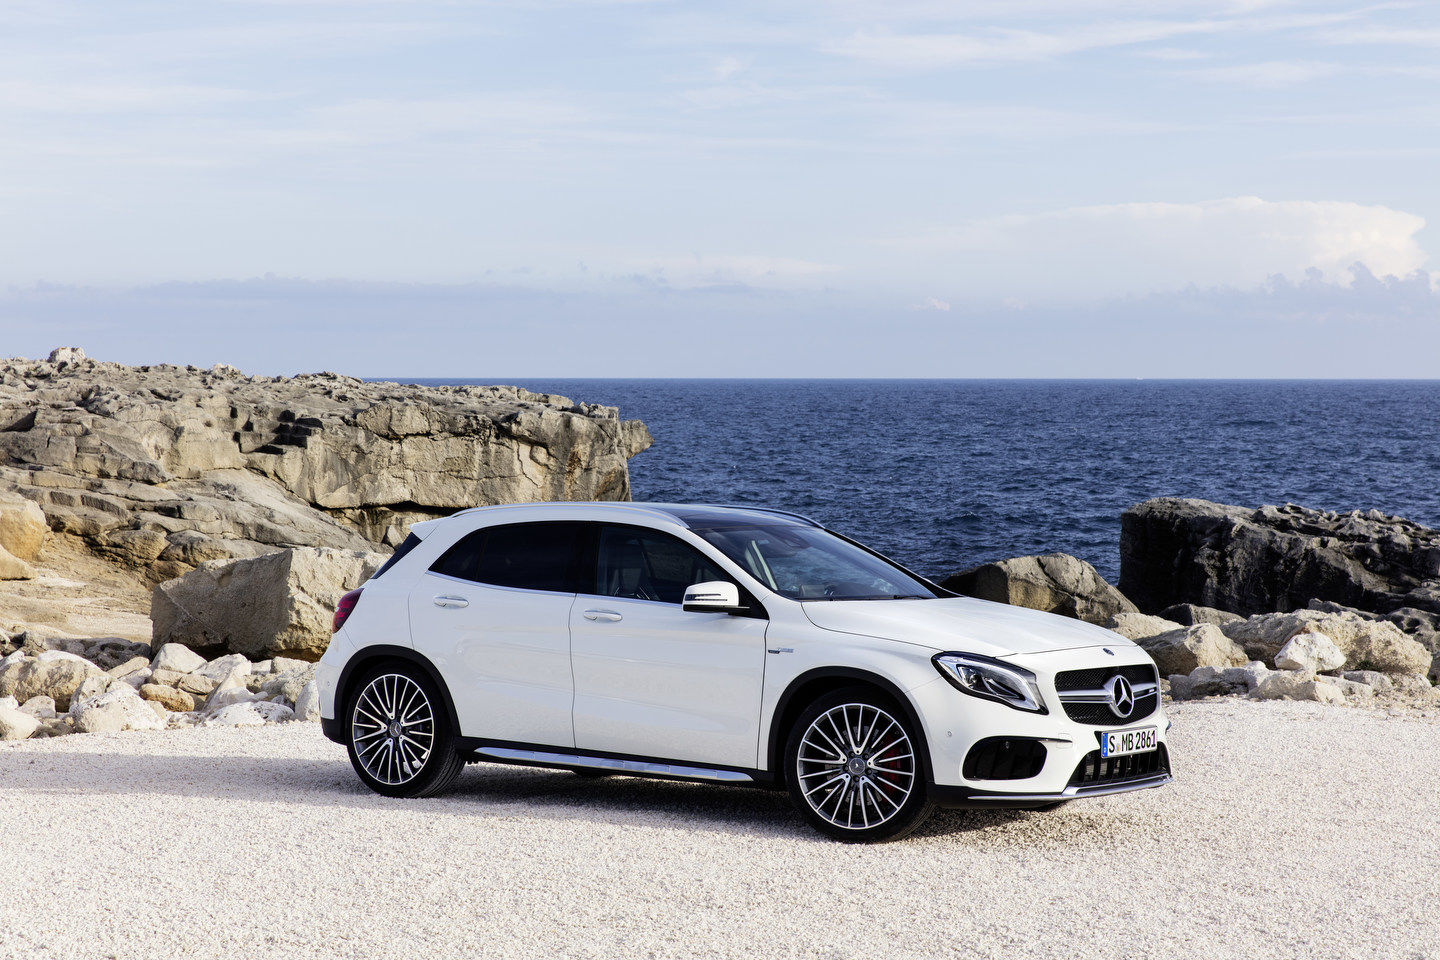 The benefits of choosing a certified pre-owned Mercedes-Benz vehicle